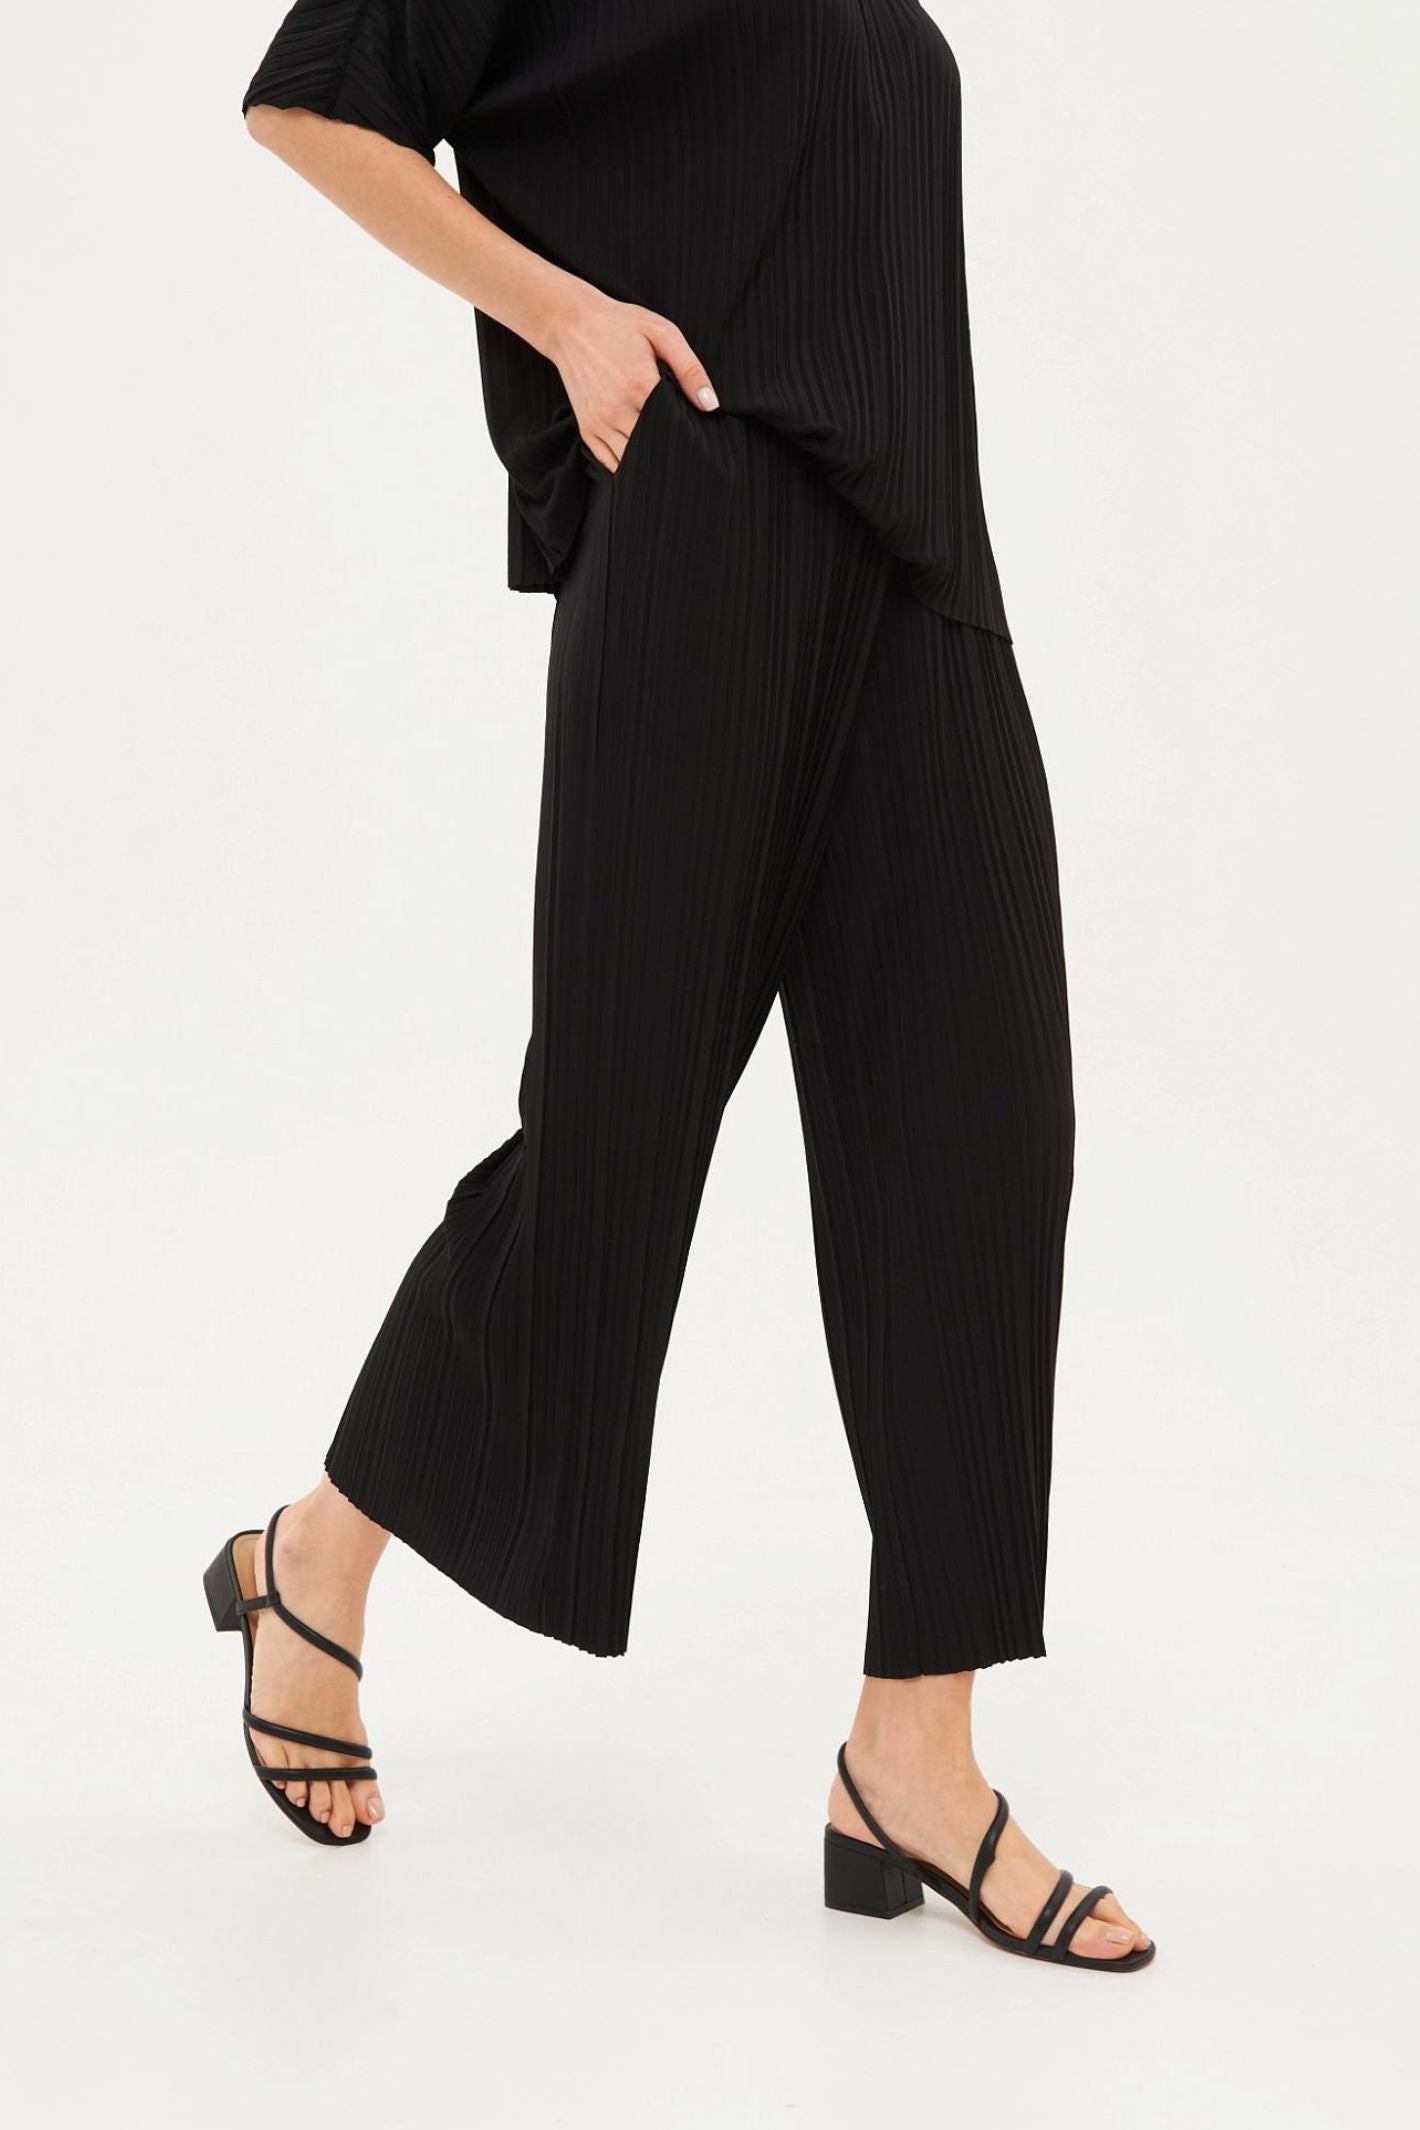 Gerry Weber 220003 Black Pleated Wide-Leg Trousers – Experience